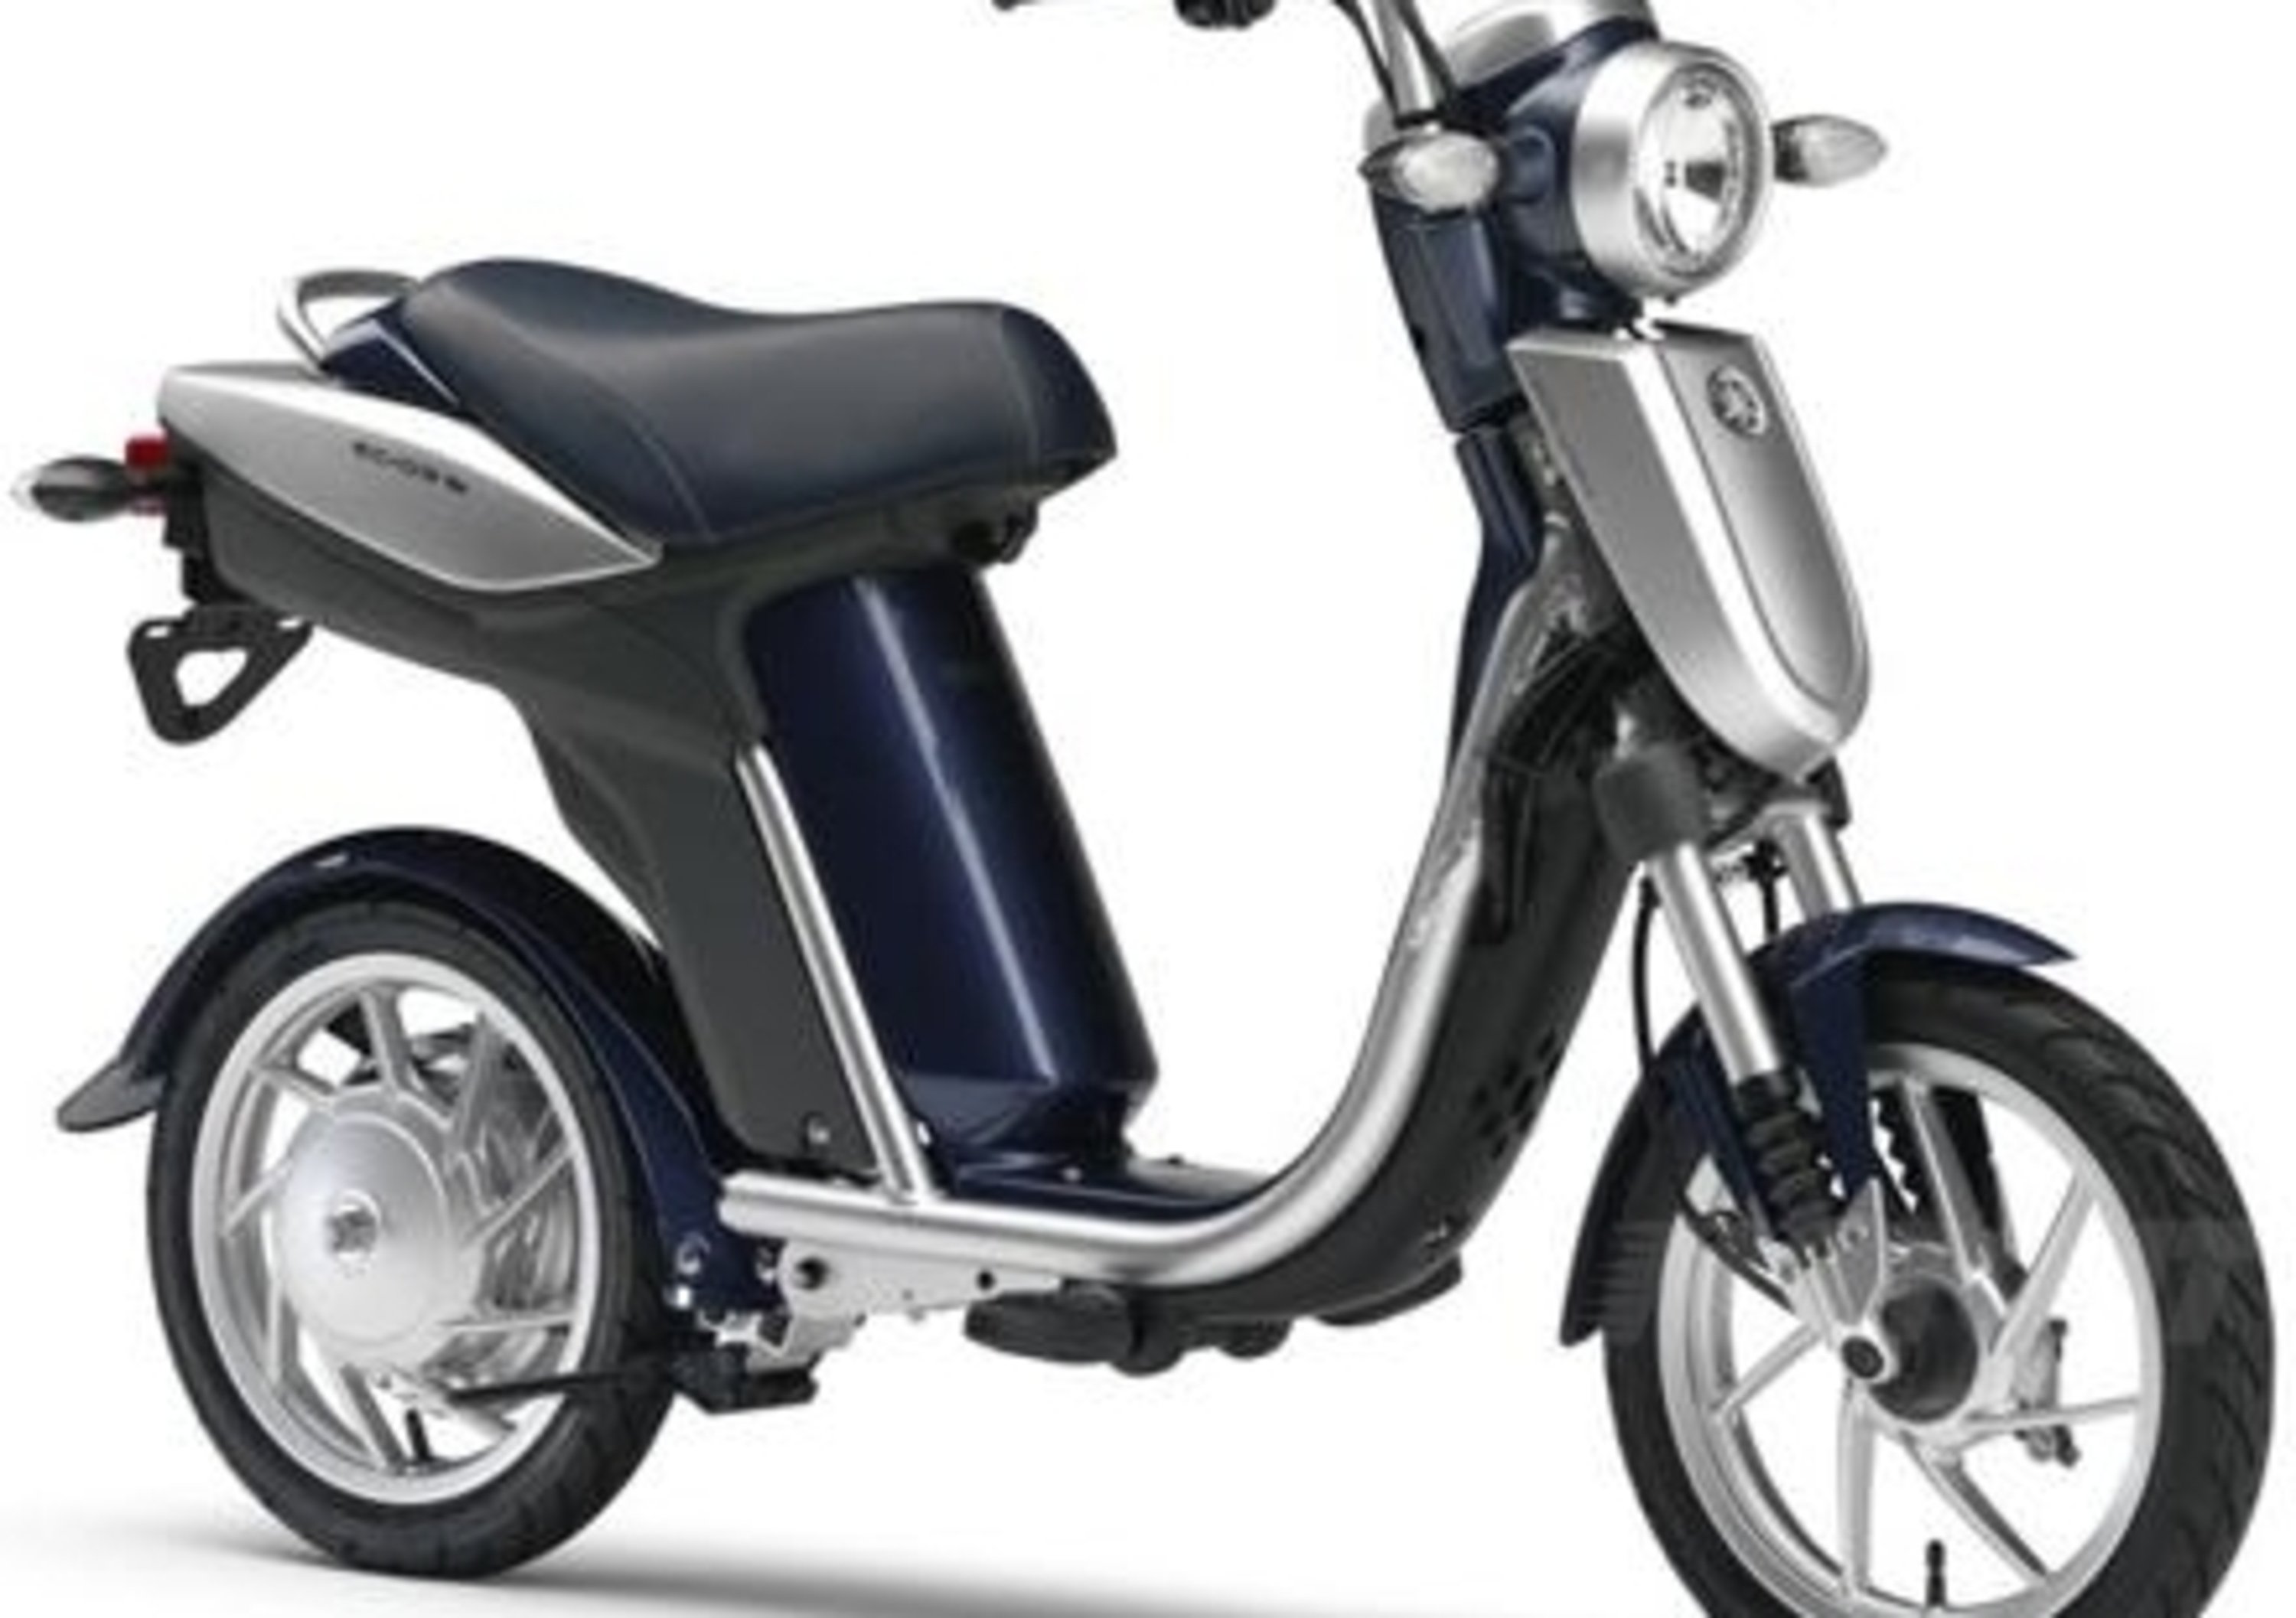 Dal 2011 il nuovo scooter elettrico Yamaha